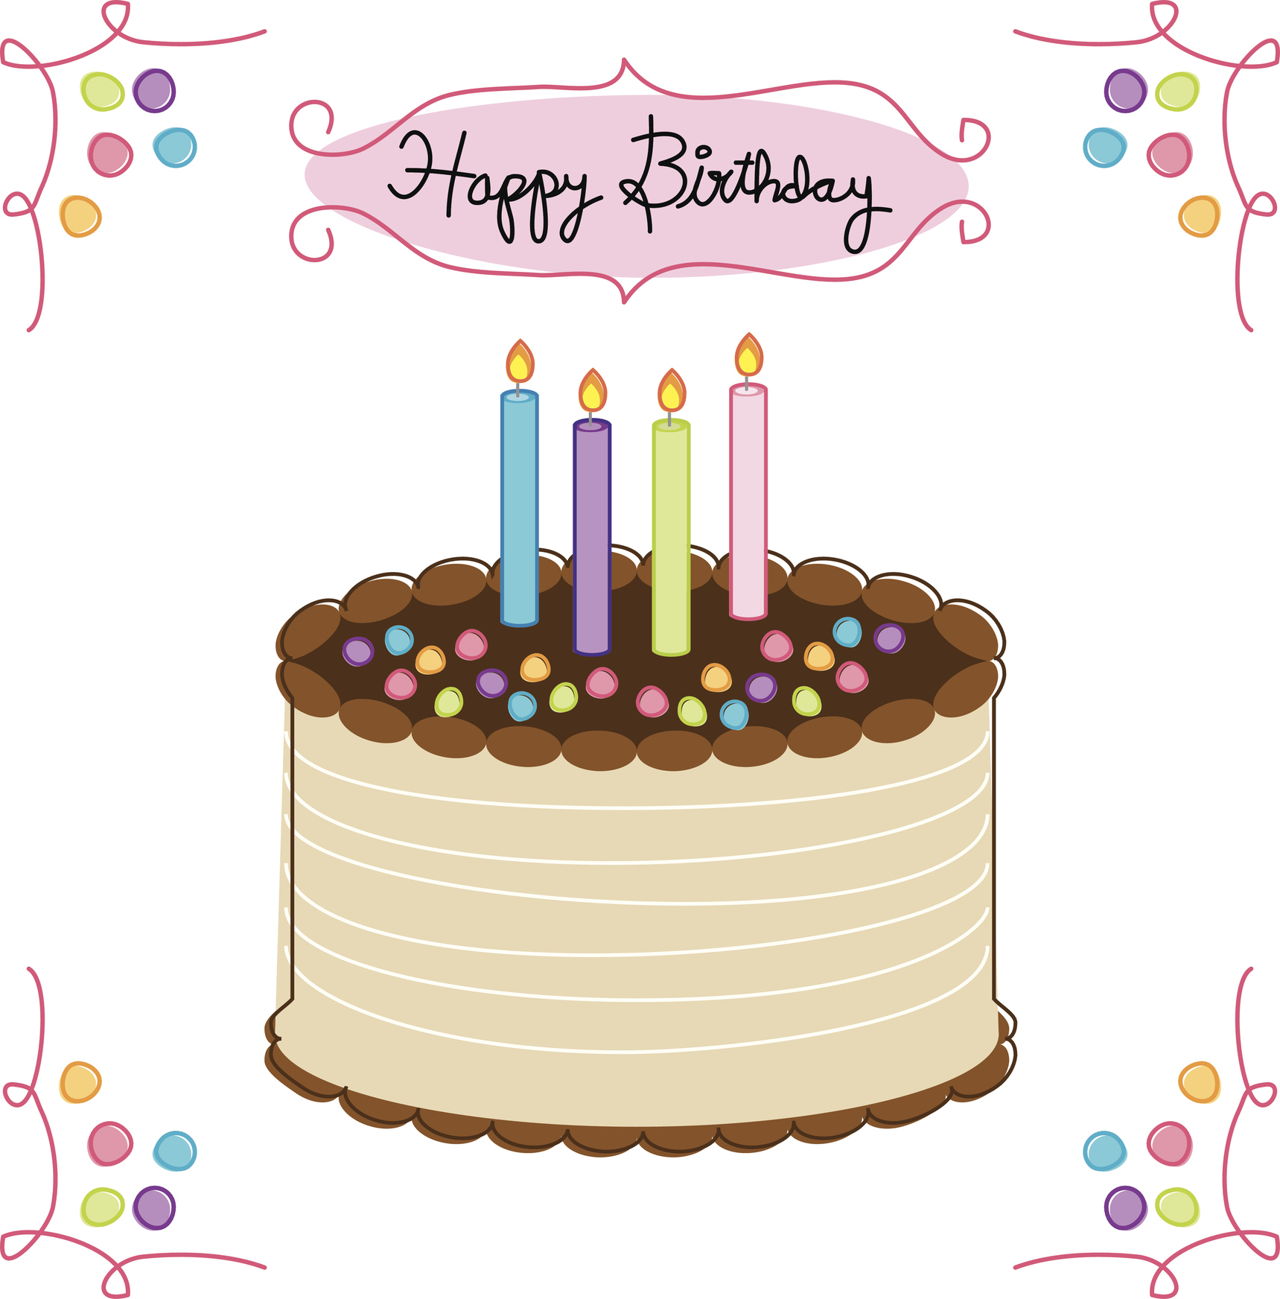 Birthday Cake Quotes And Sayings